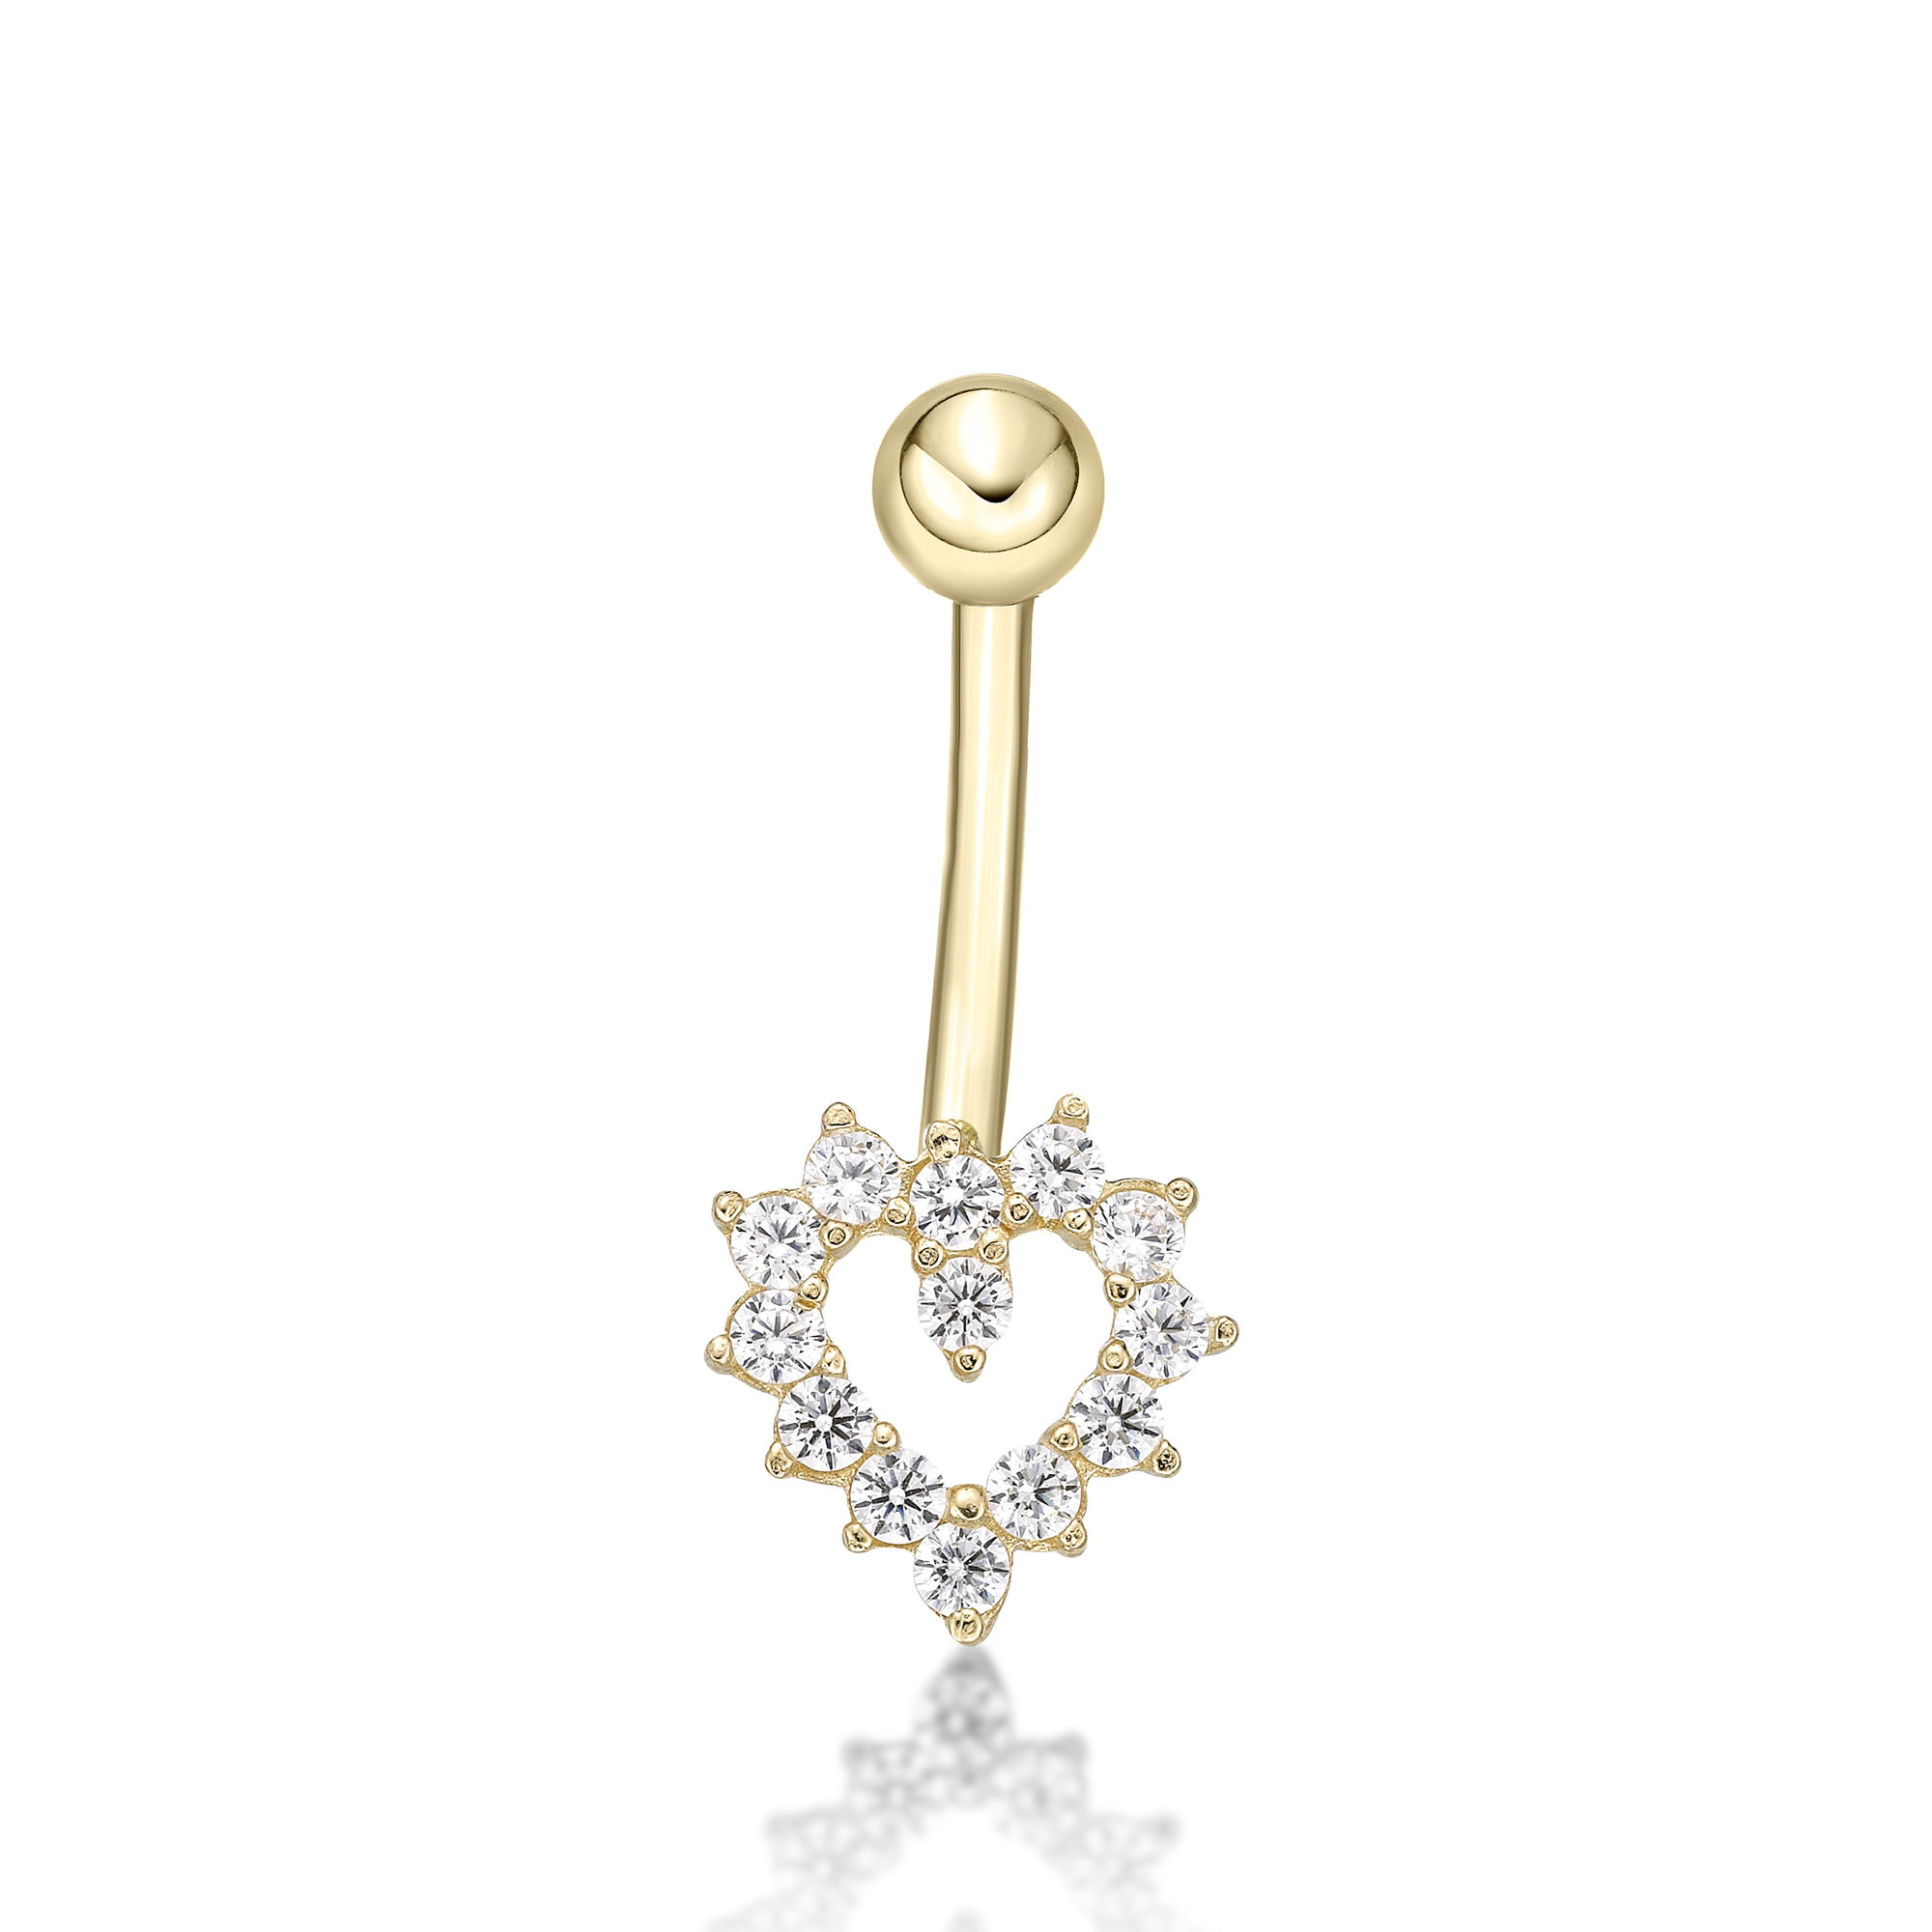 48612-belly-ring-hearts-yellow-gold-cubic-zirconia-round-1mm-48612-2.jpg